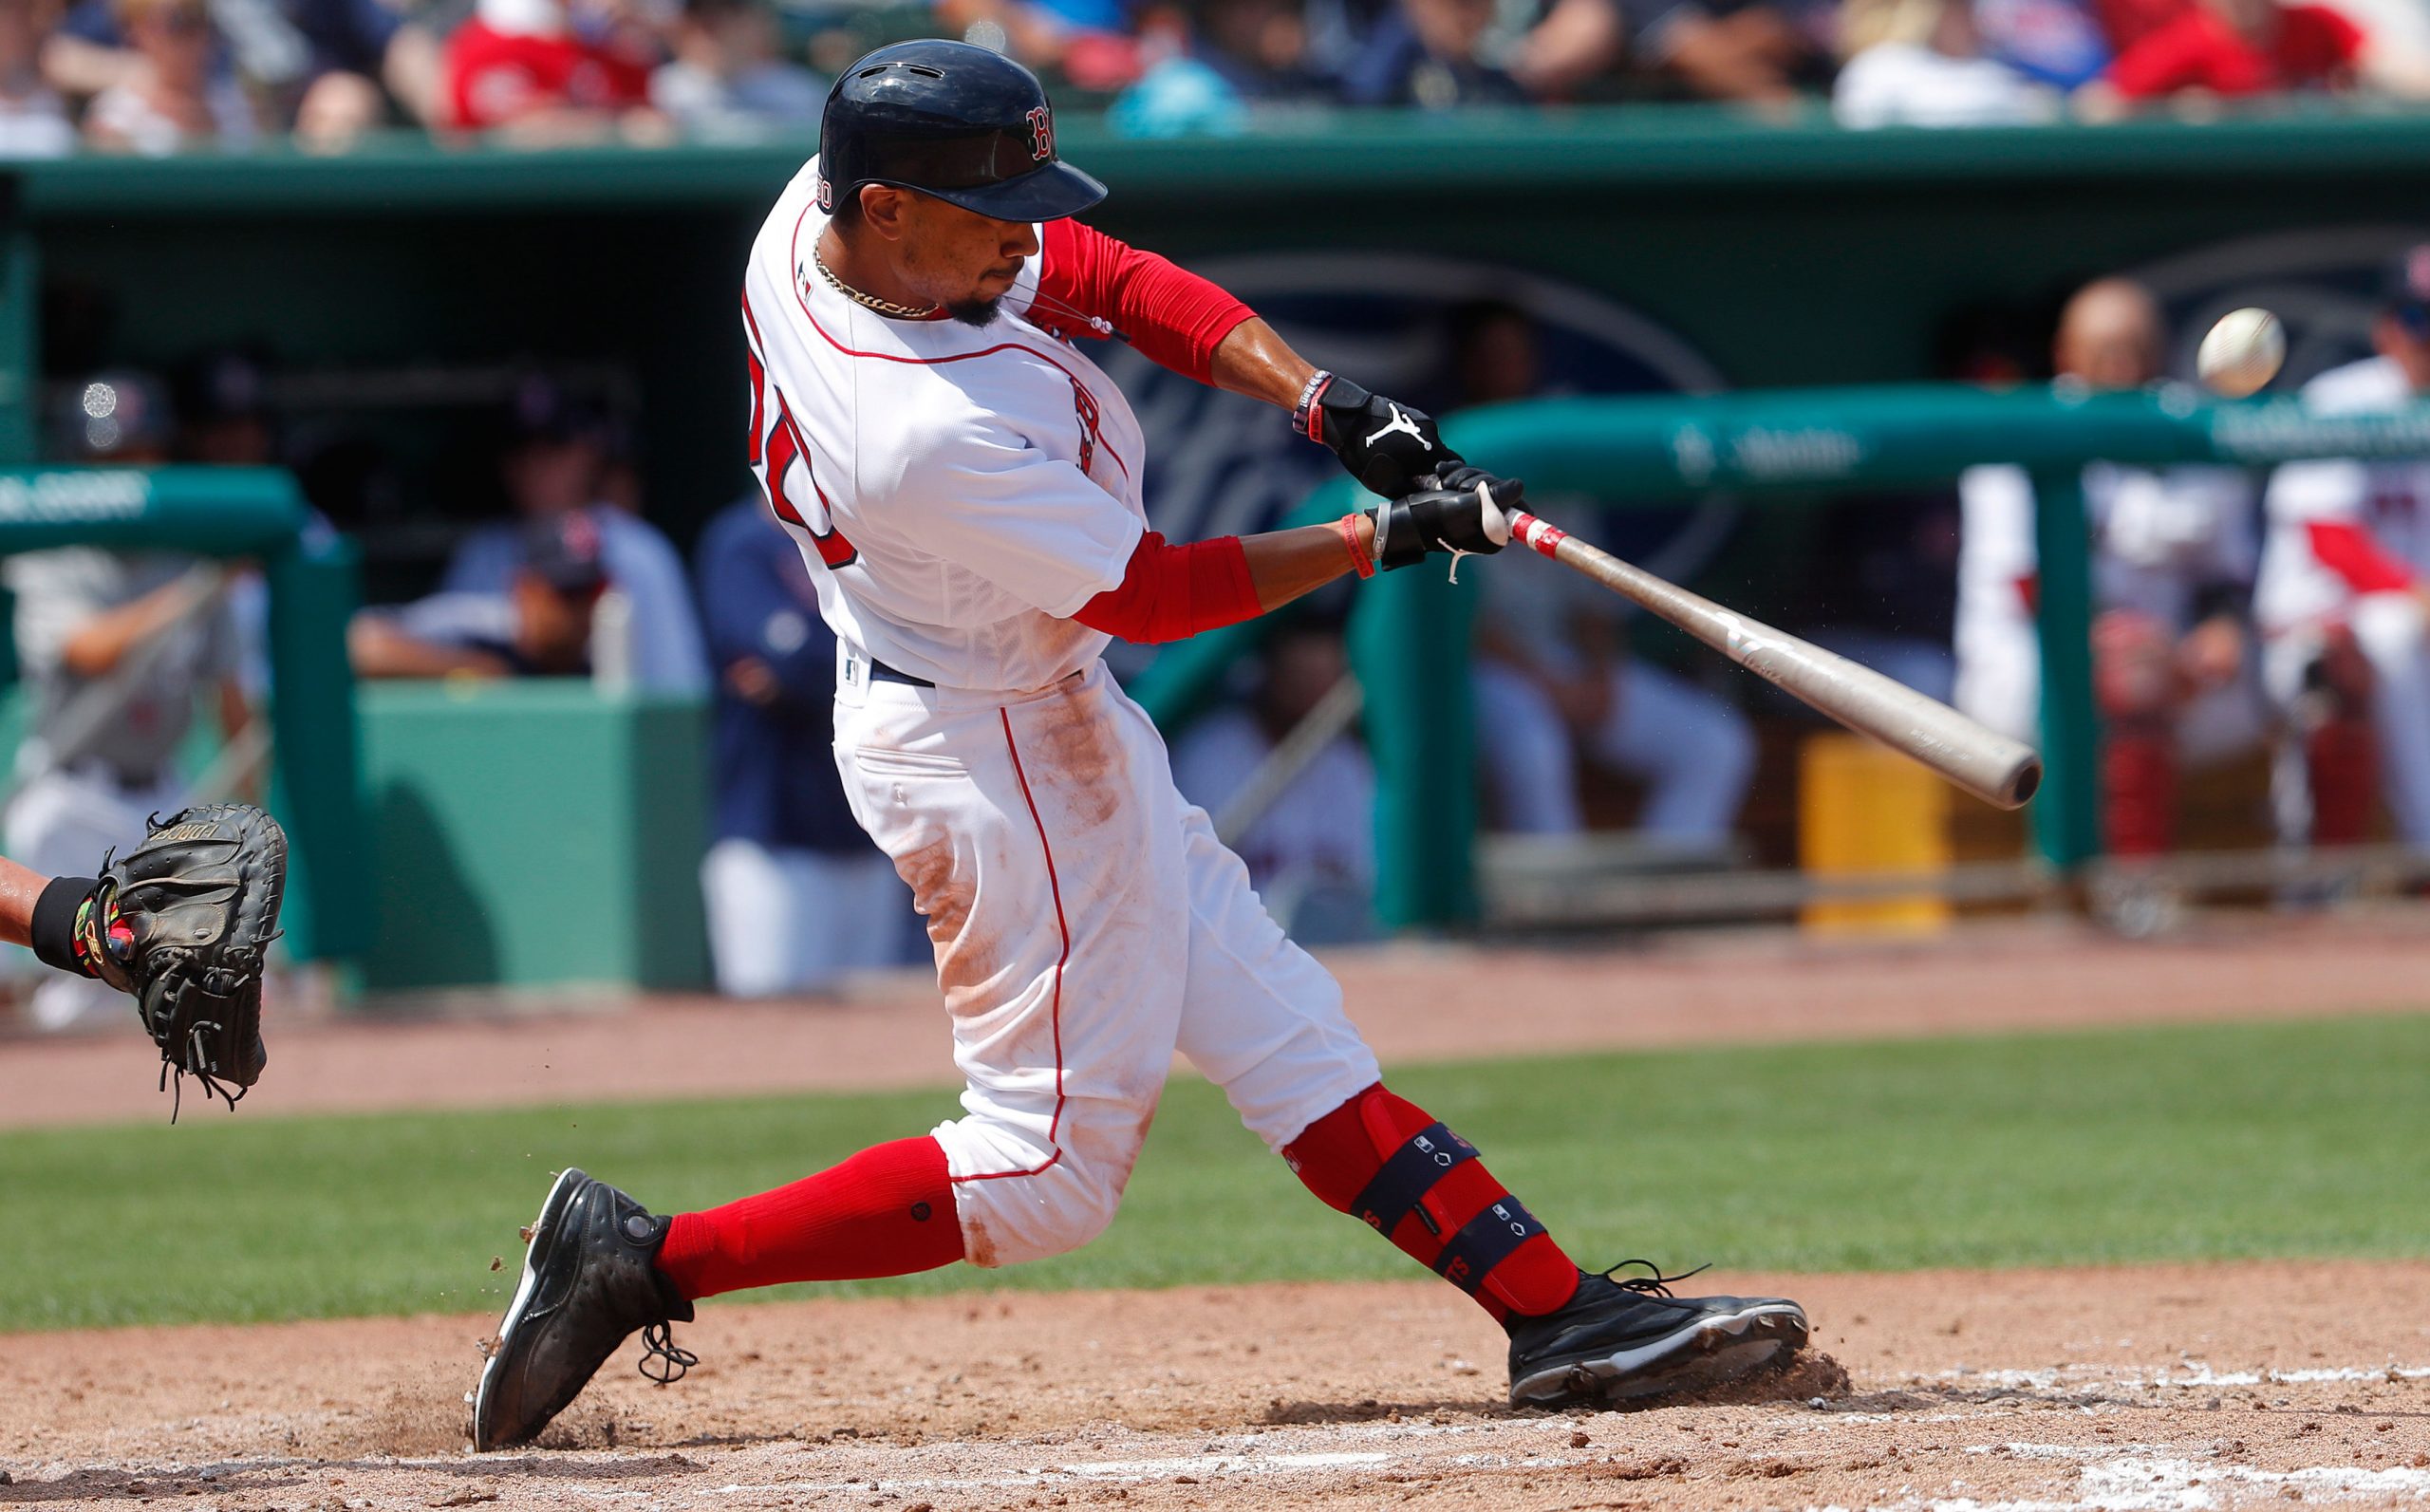 It's not time to worry about Mookie Betts' long-term future in